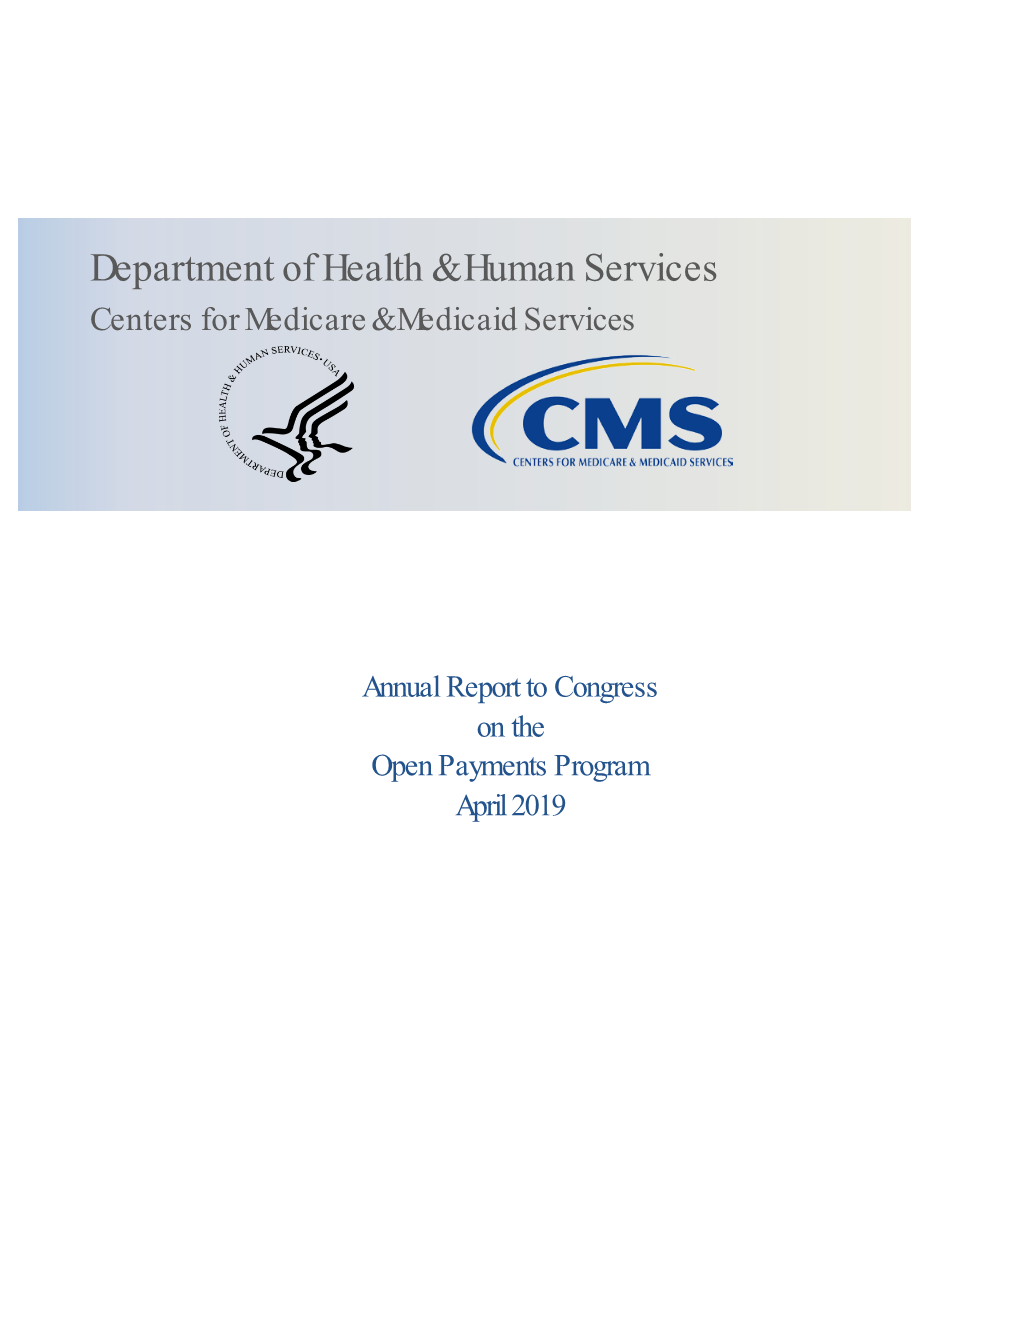 Annual Report to Congress on Open Payments Program April 2019